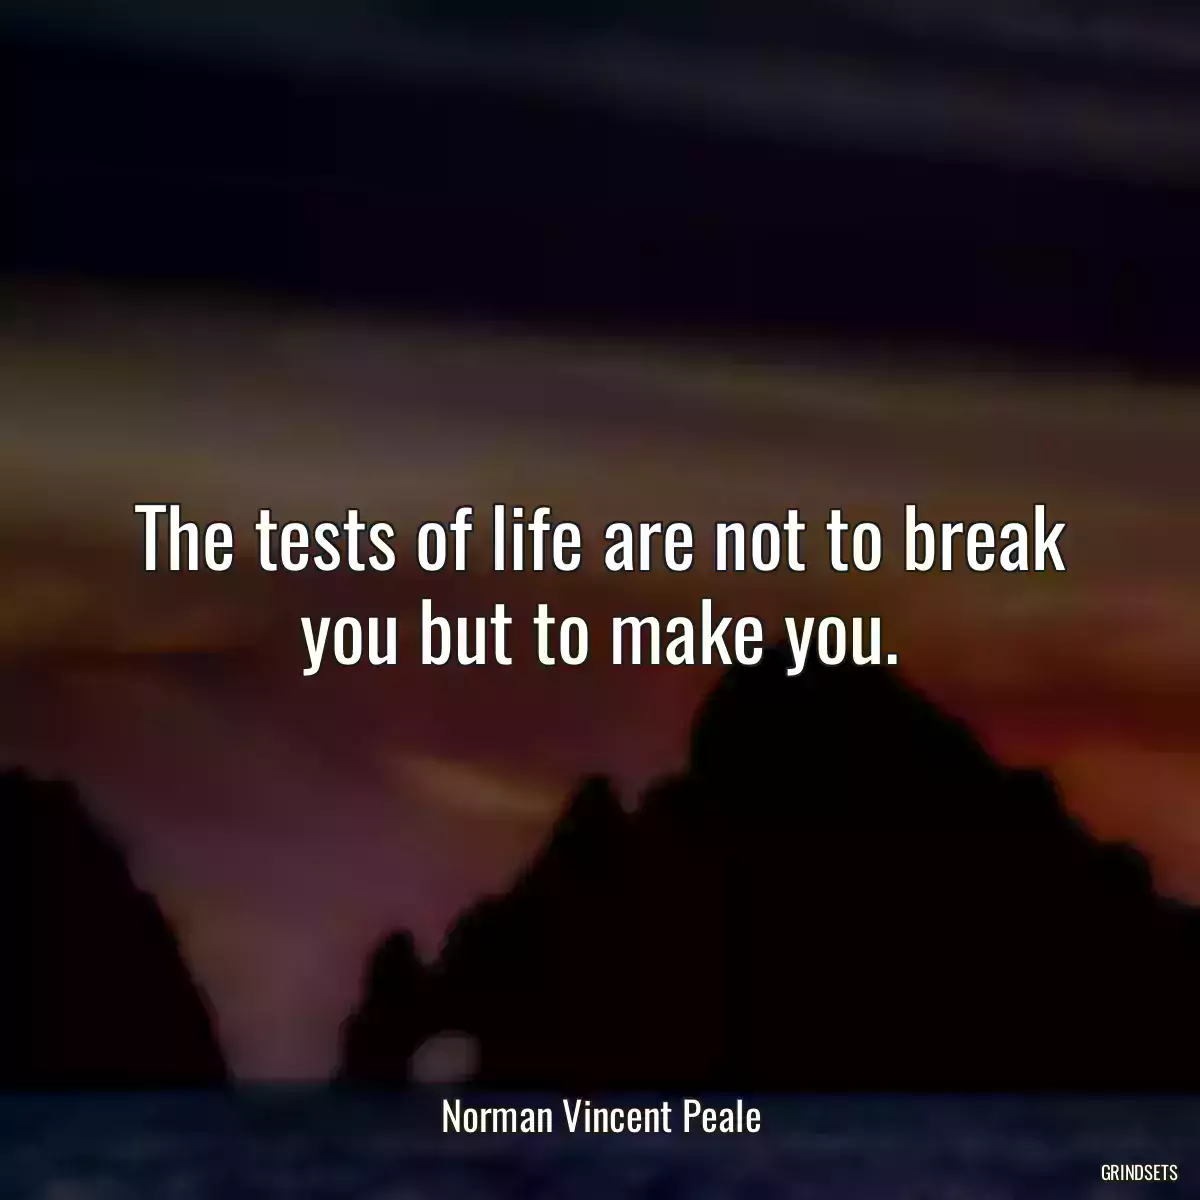 The tests of life are not to break you but to make you.